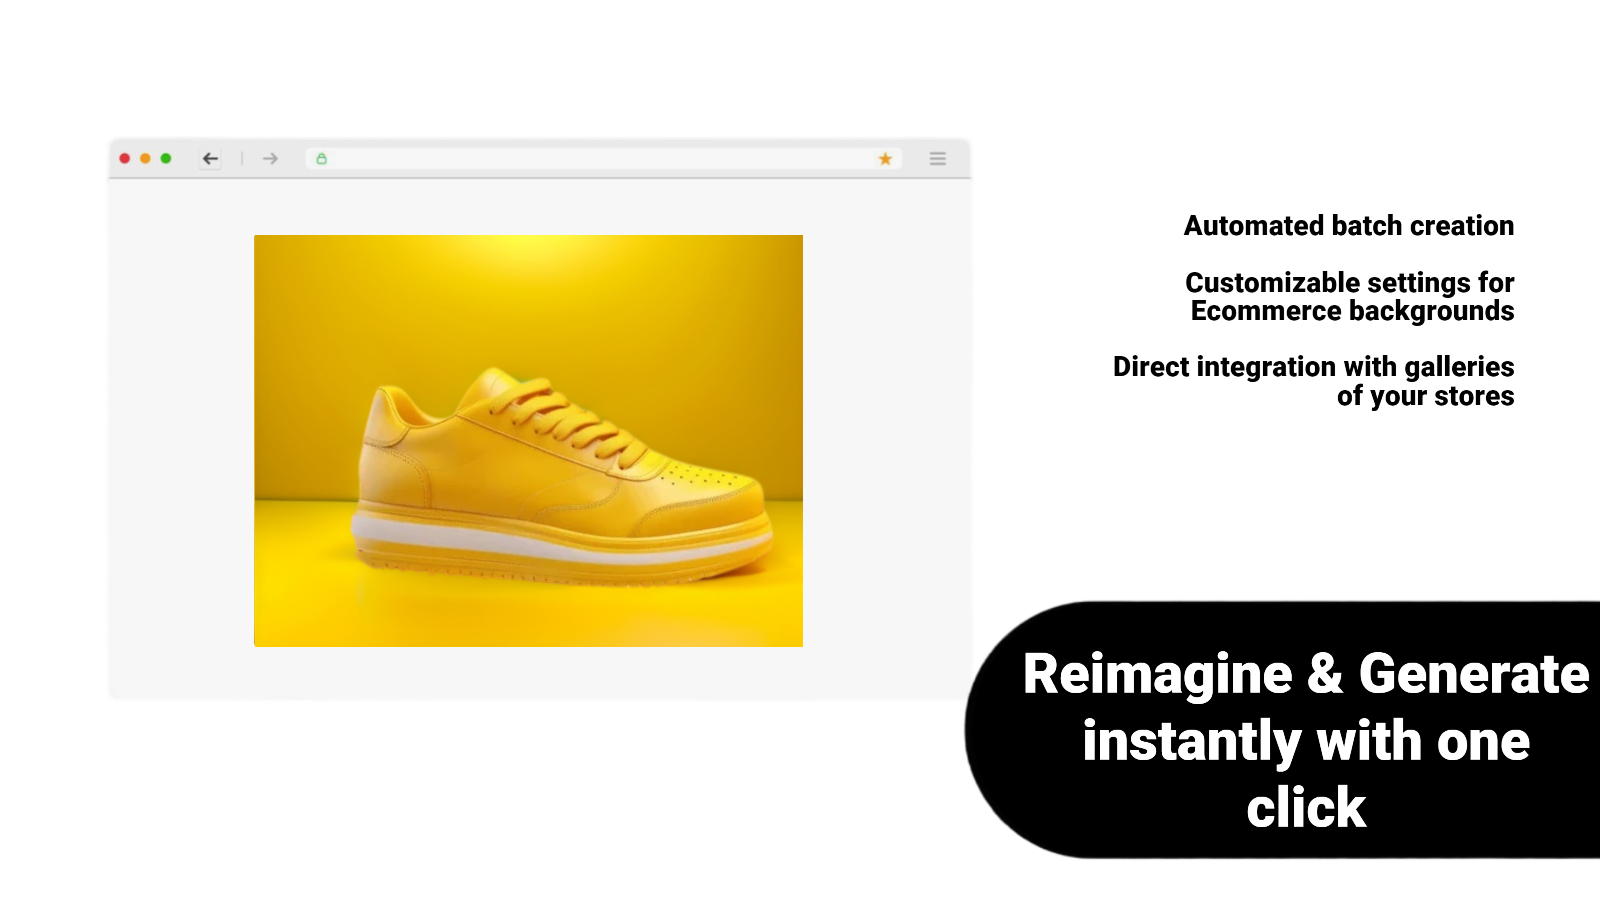 Reimagine & Generate Background Images from Ecommerce products.